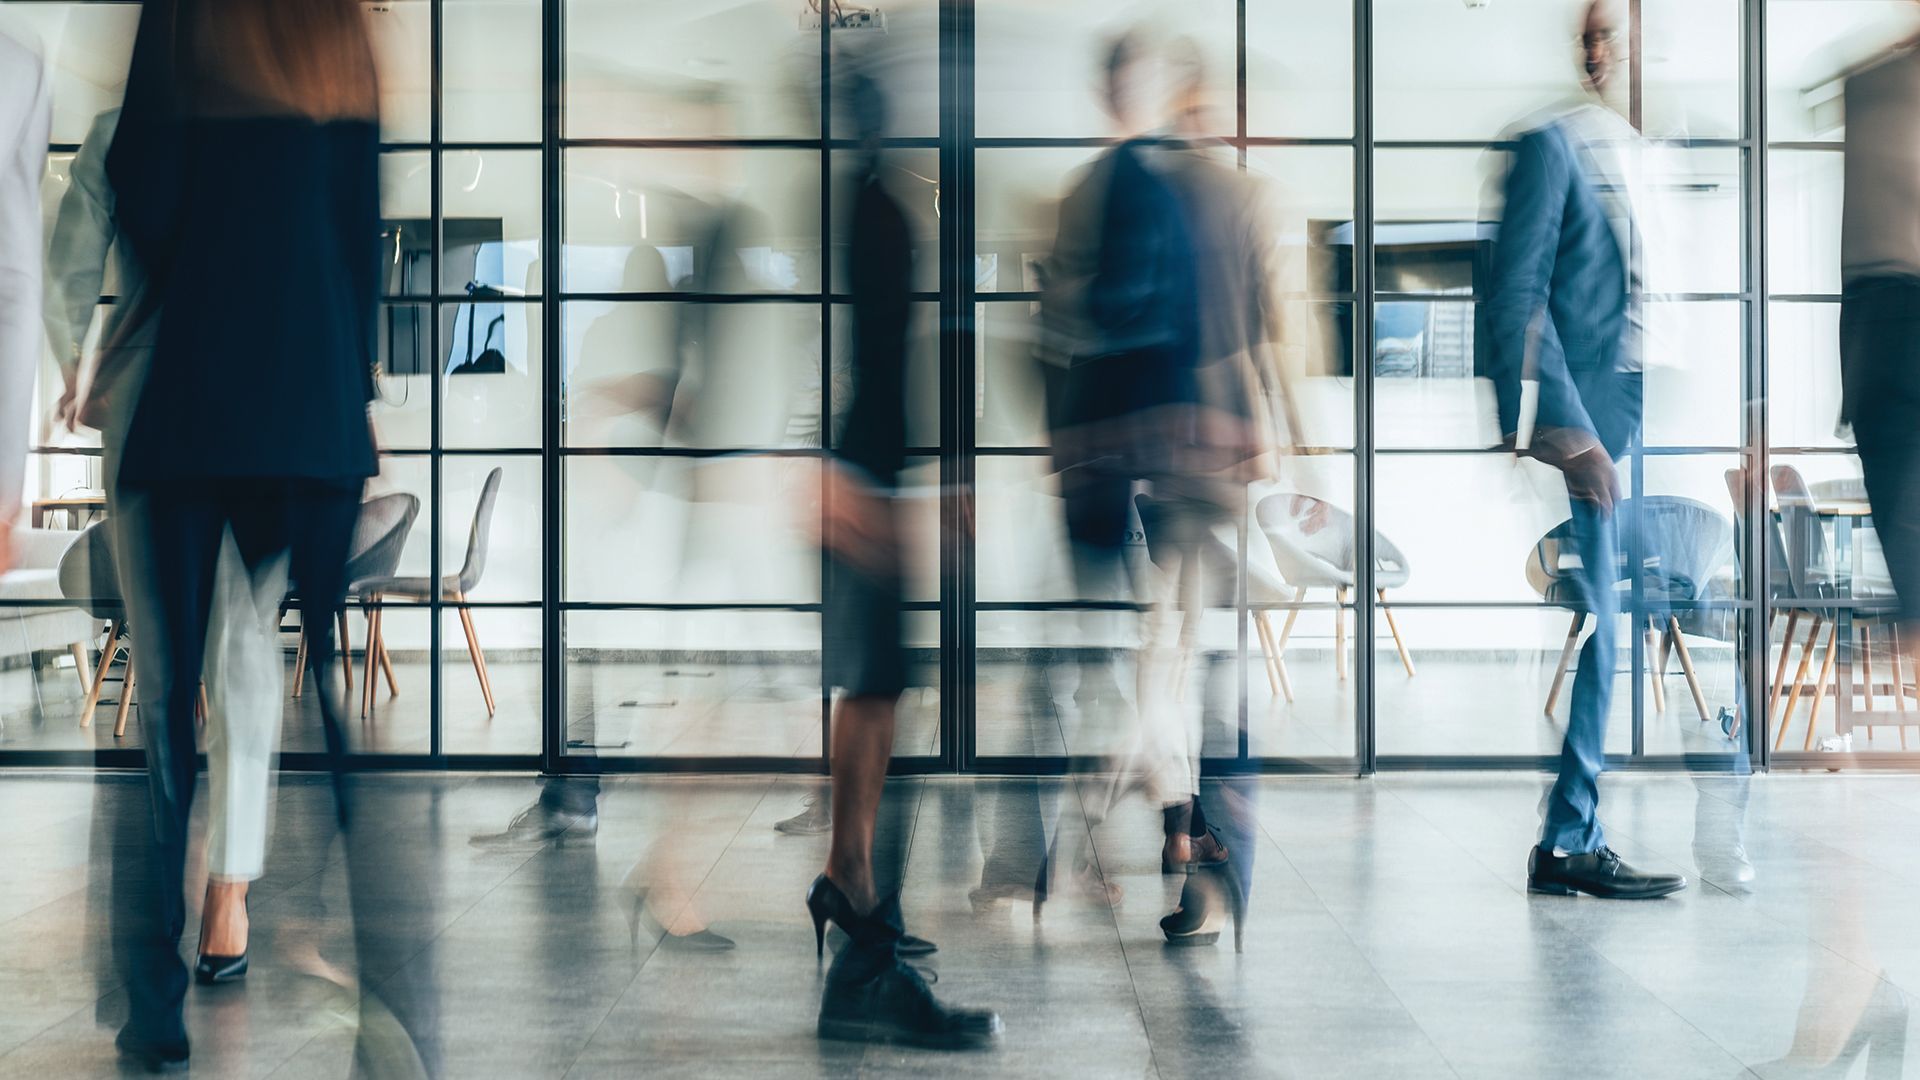 Blurred figures walk through a glass-walled corporate lobby.